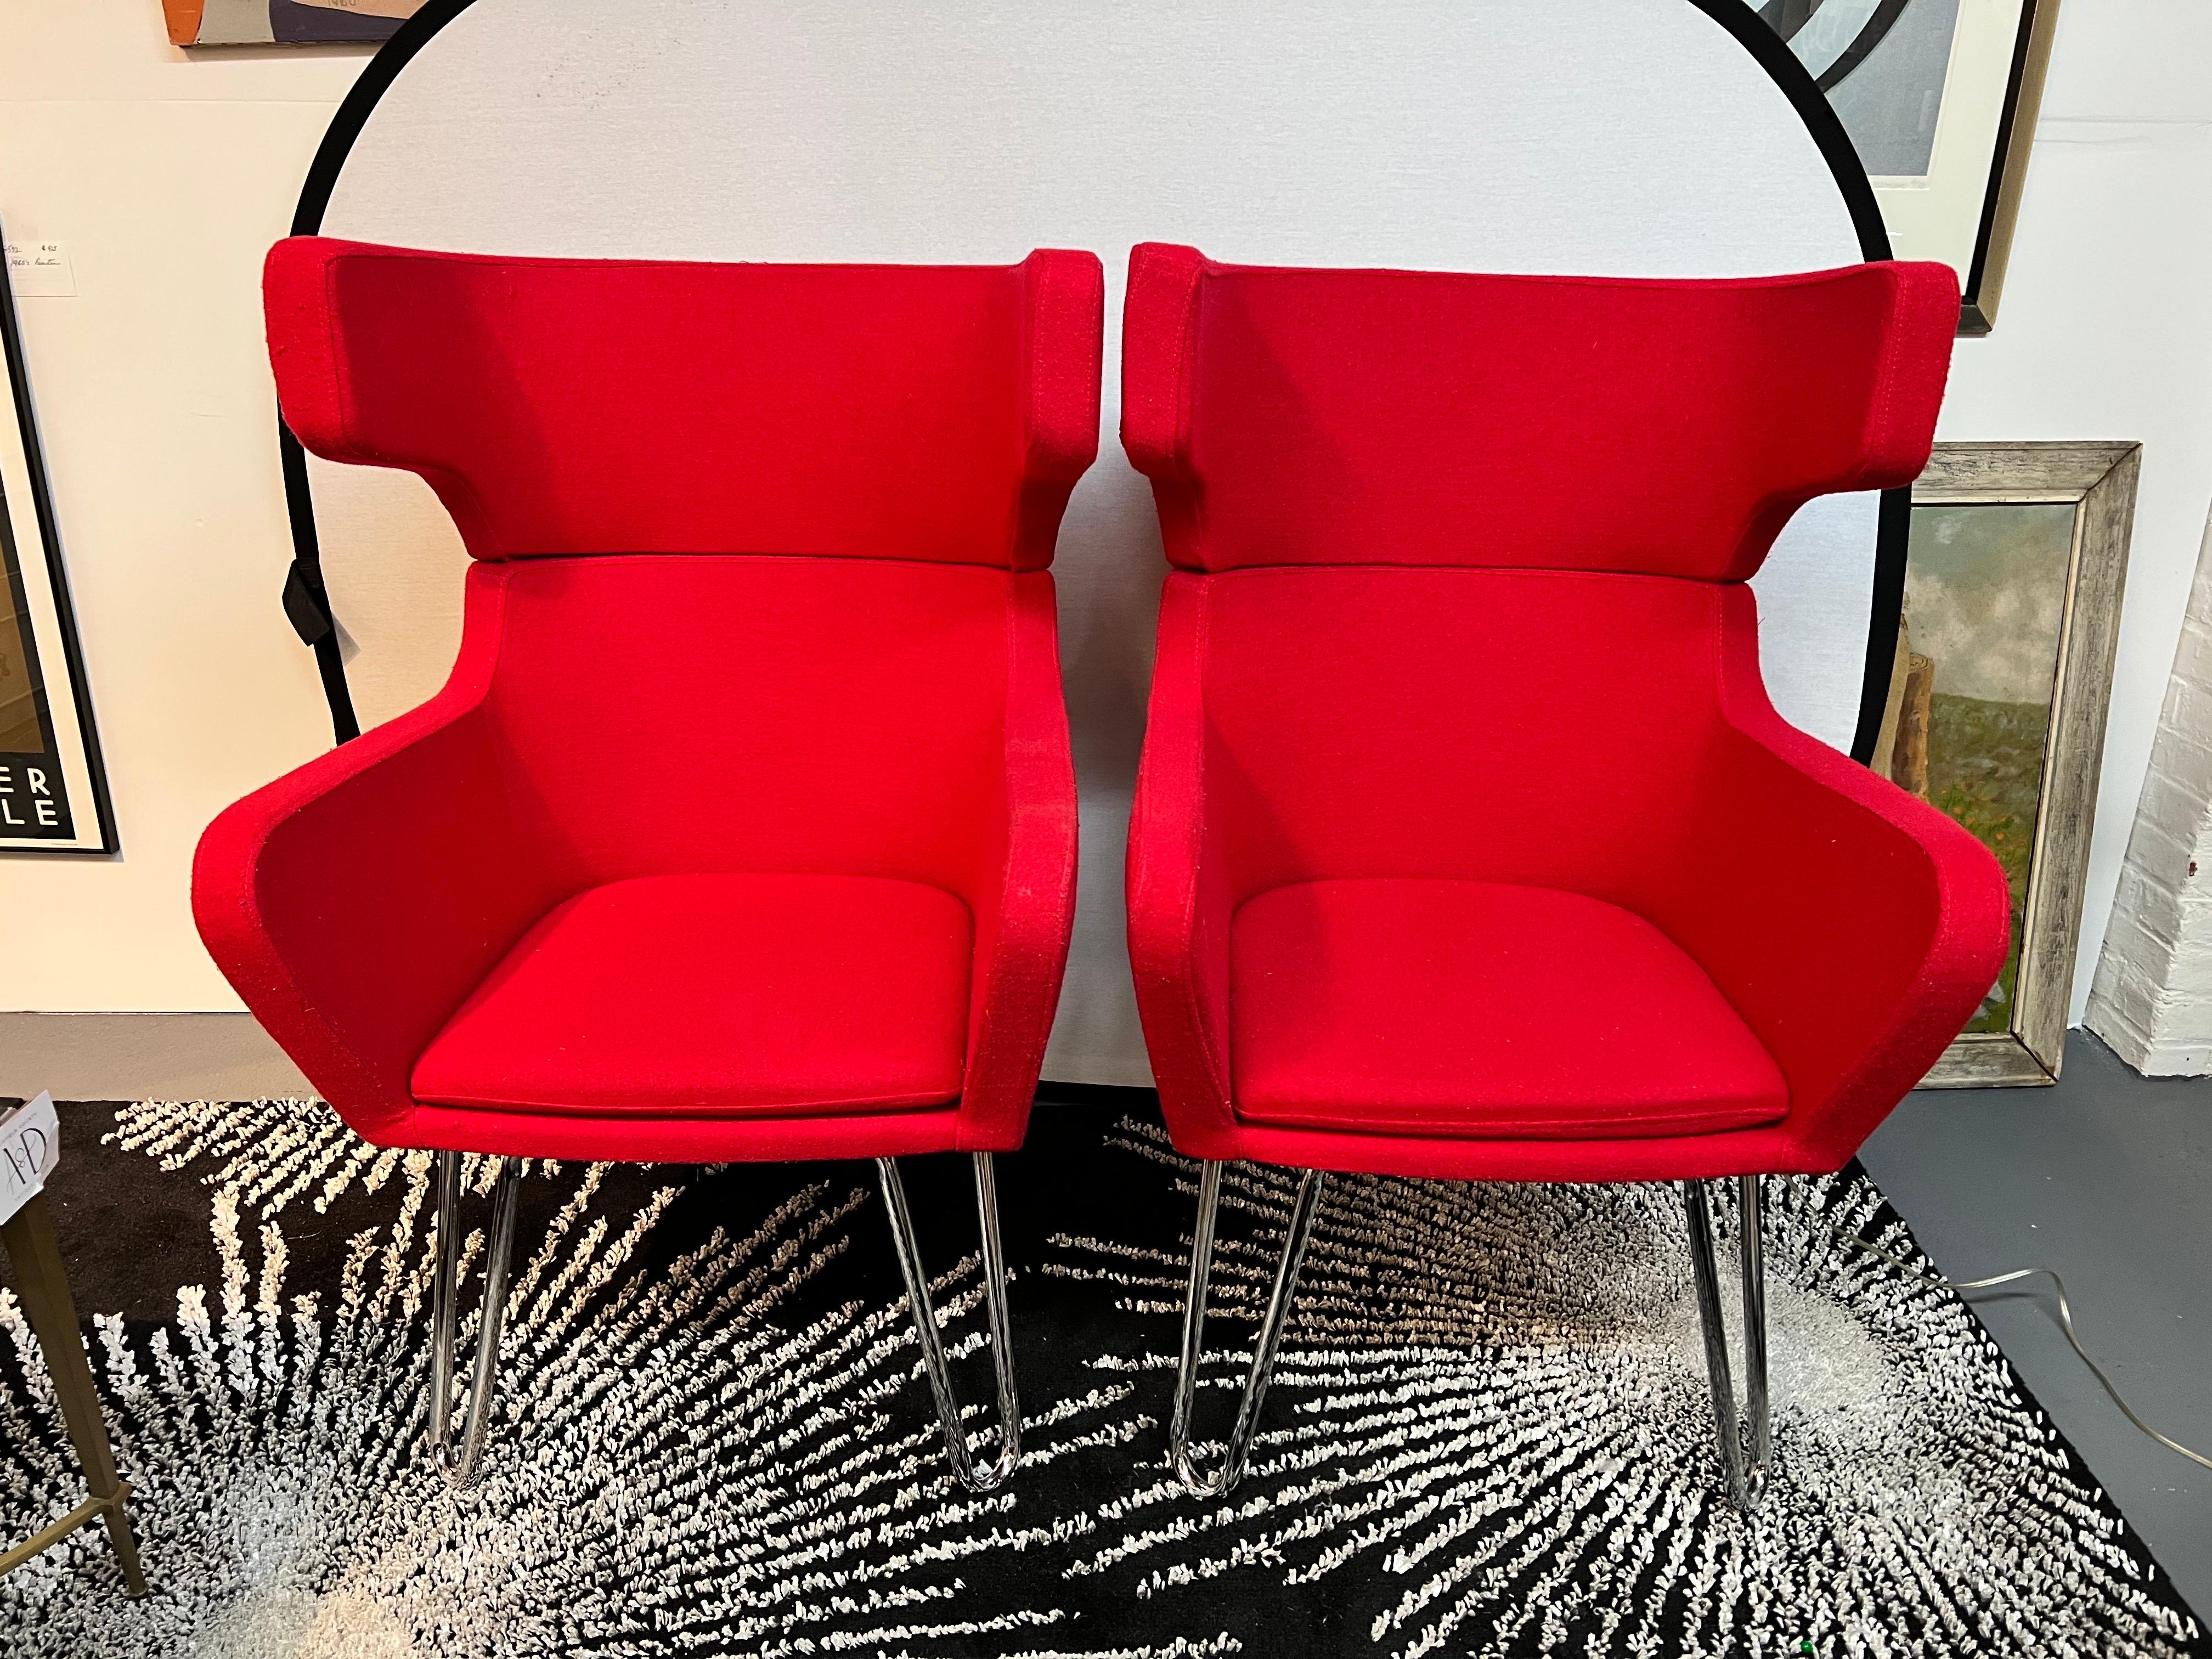 Pair of mid century Ox chairs. These are reproductions and well done with vibrant red synthetic fabric and hairpin legs. A gorgeous set.